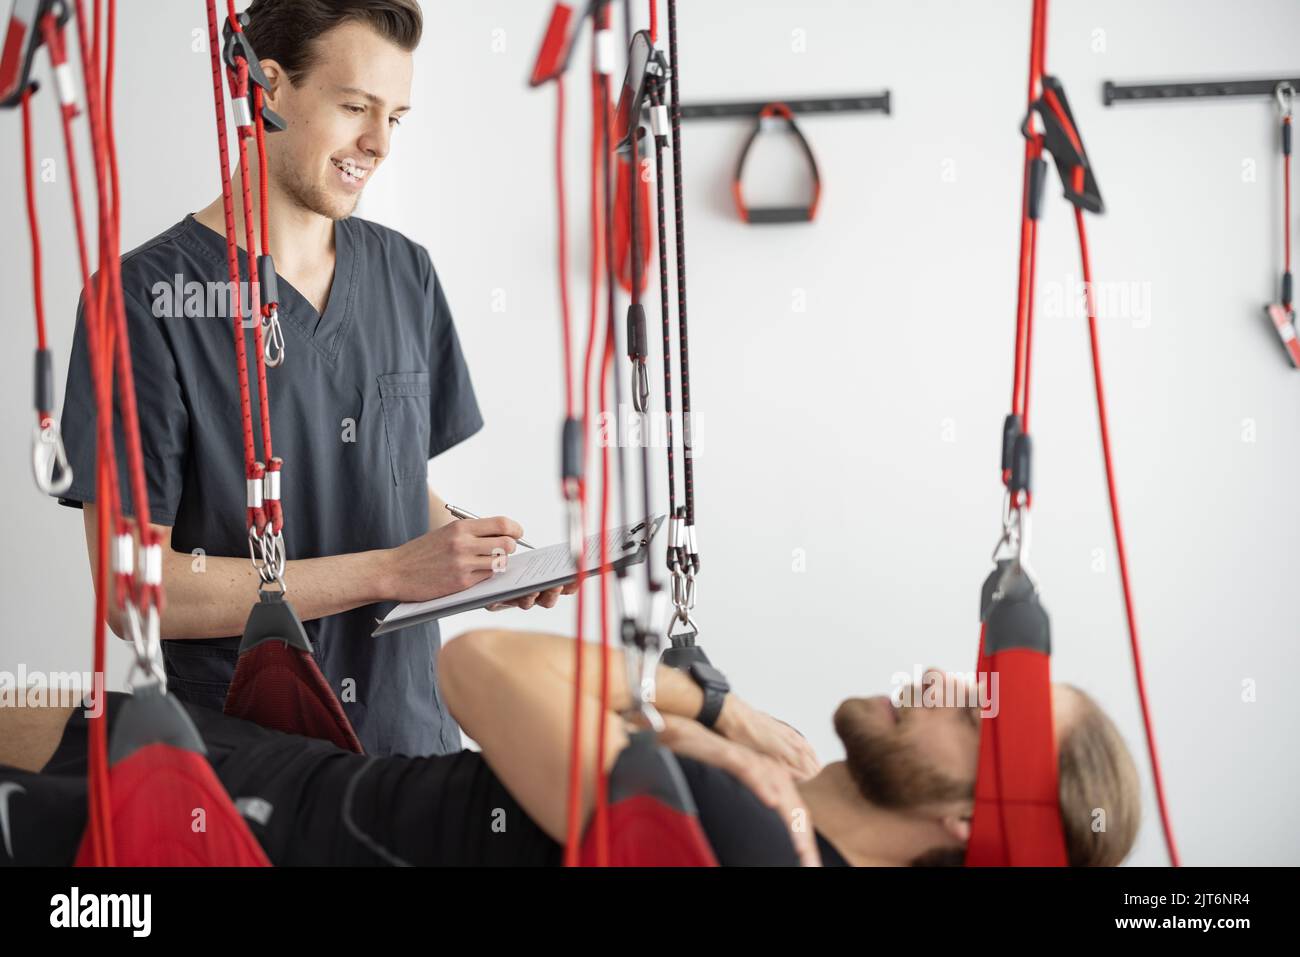 Rehabilitation specialist examining male patient before active treatment on suspension straps. Stock Photo